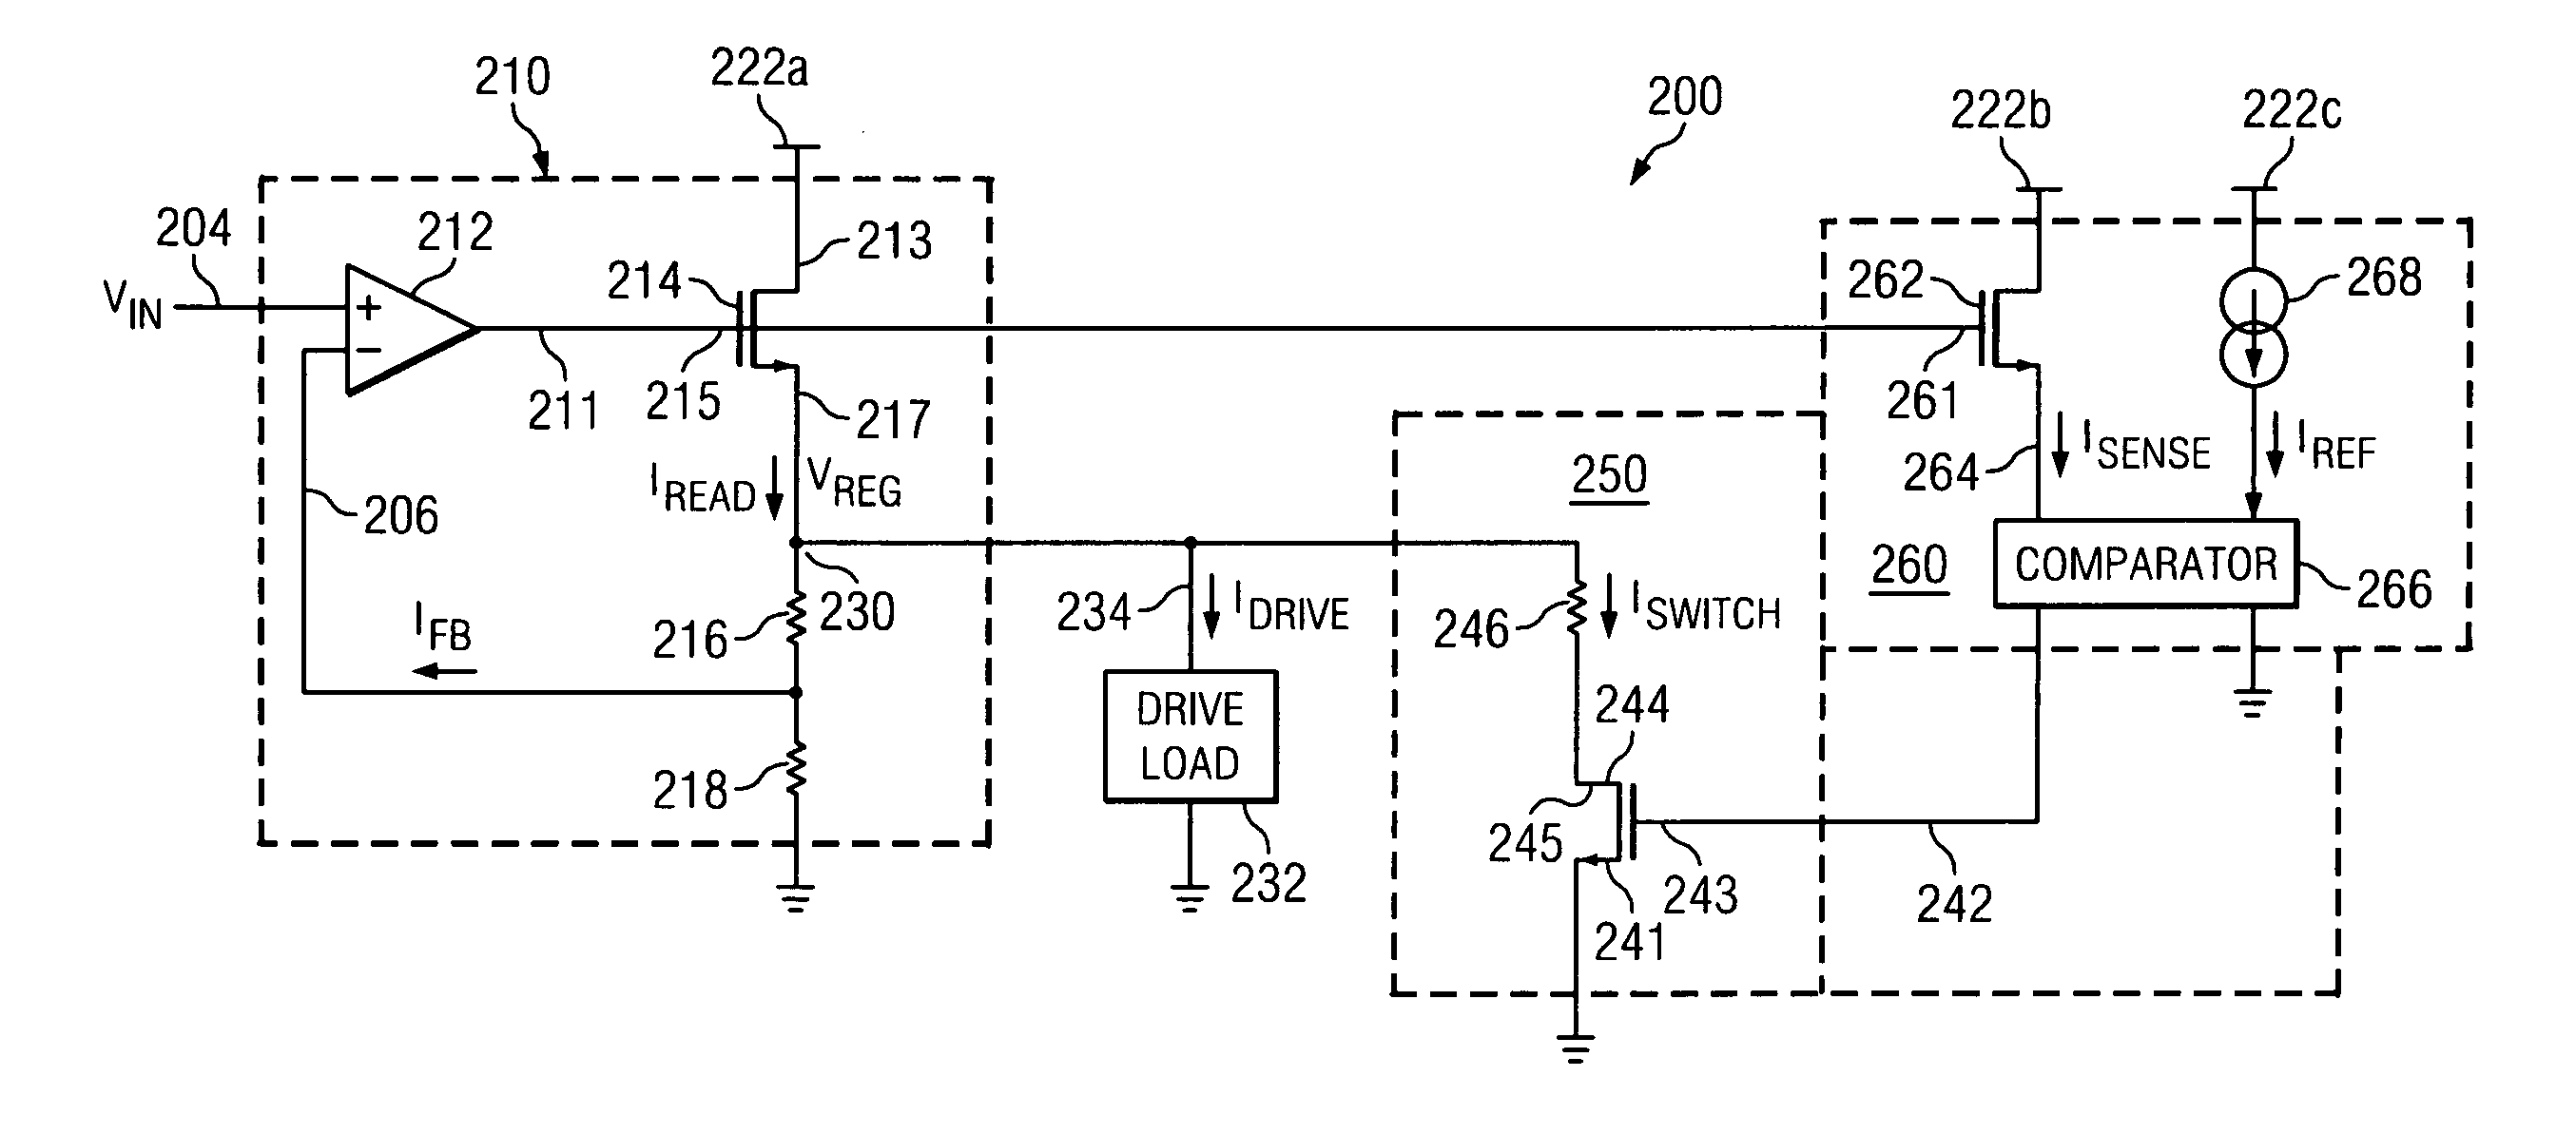 Circuits, devices and methods for regulator minimum load control